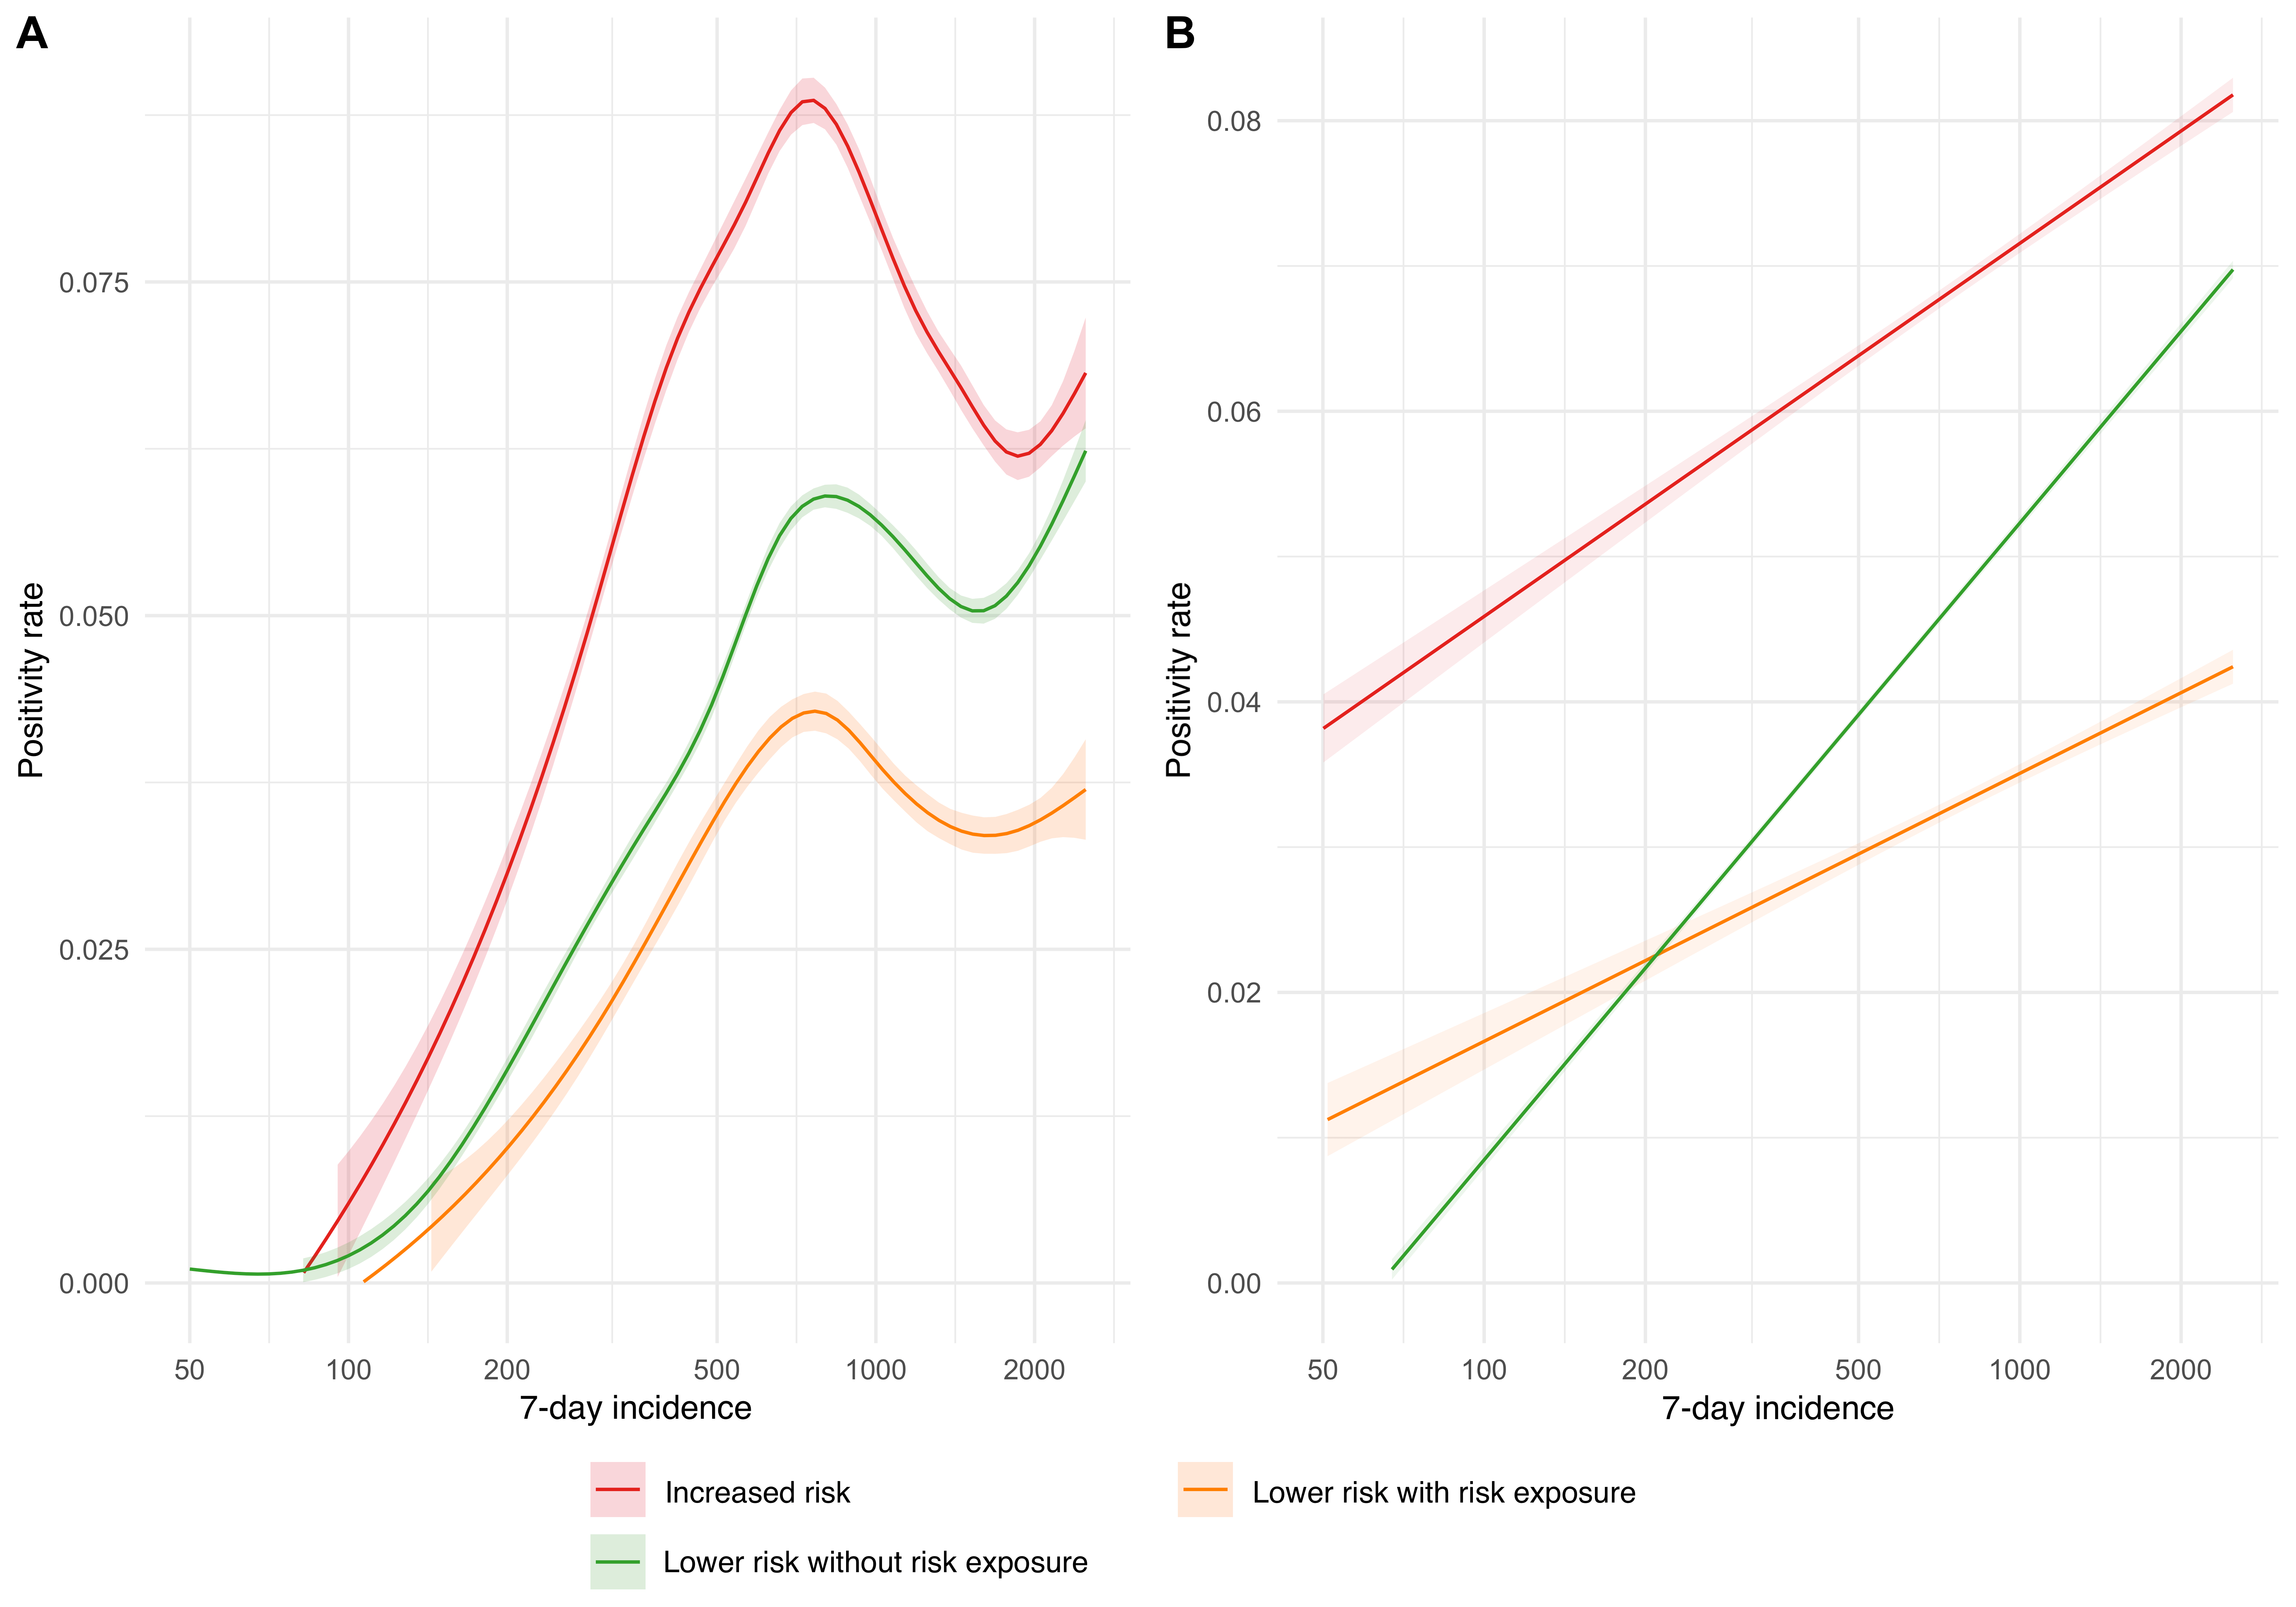 Figure 13: Relationship between local 7-day incidence and positivity rate after risk notification, smoothed and with confidence interval, in (A) nonlinear and (B) linear approximation (RAT).